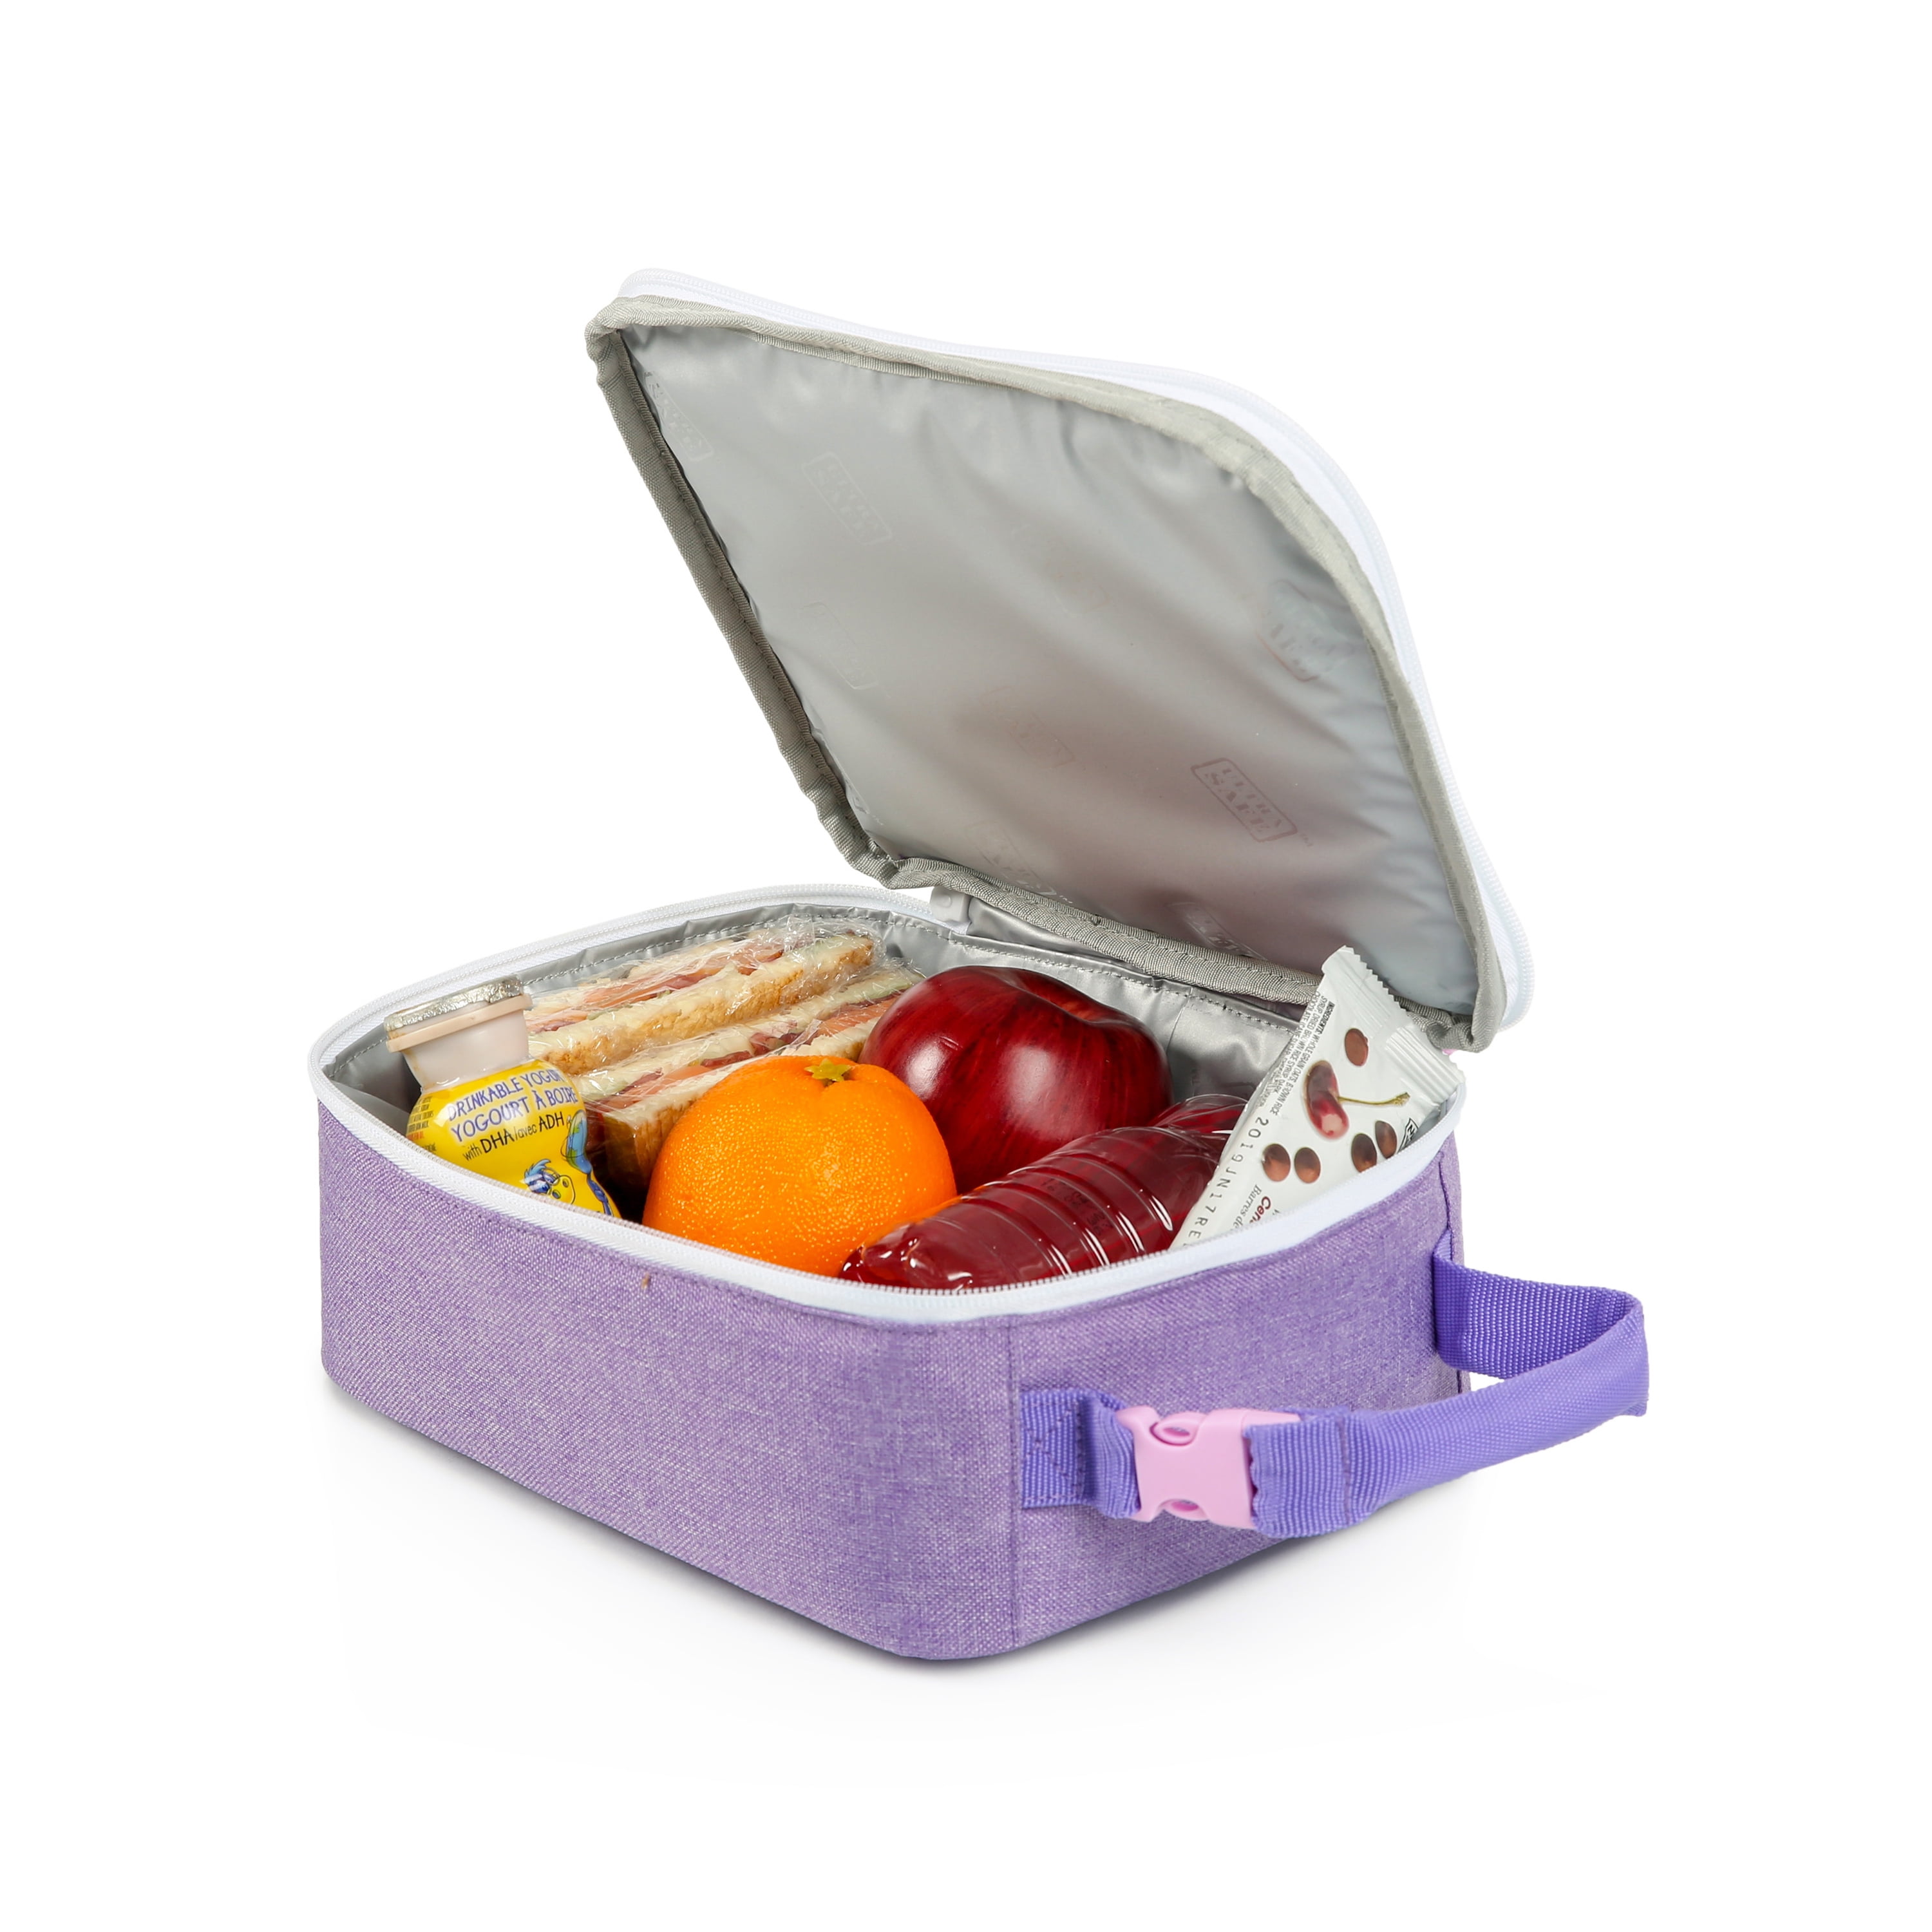 UOYHXQ Rainbow Insulated Lunch Box for Girls, 12.4 x 10 x 2